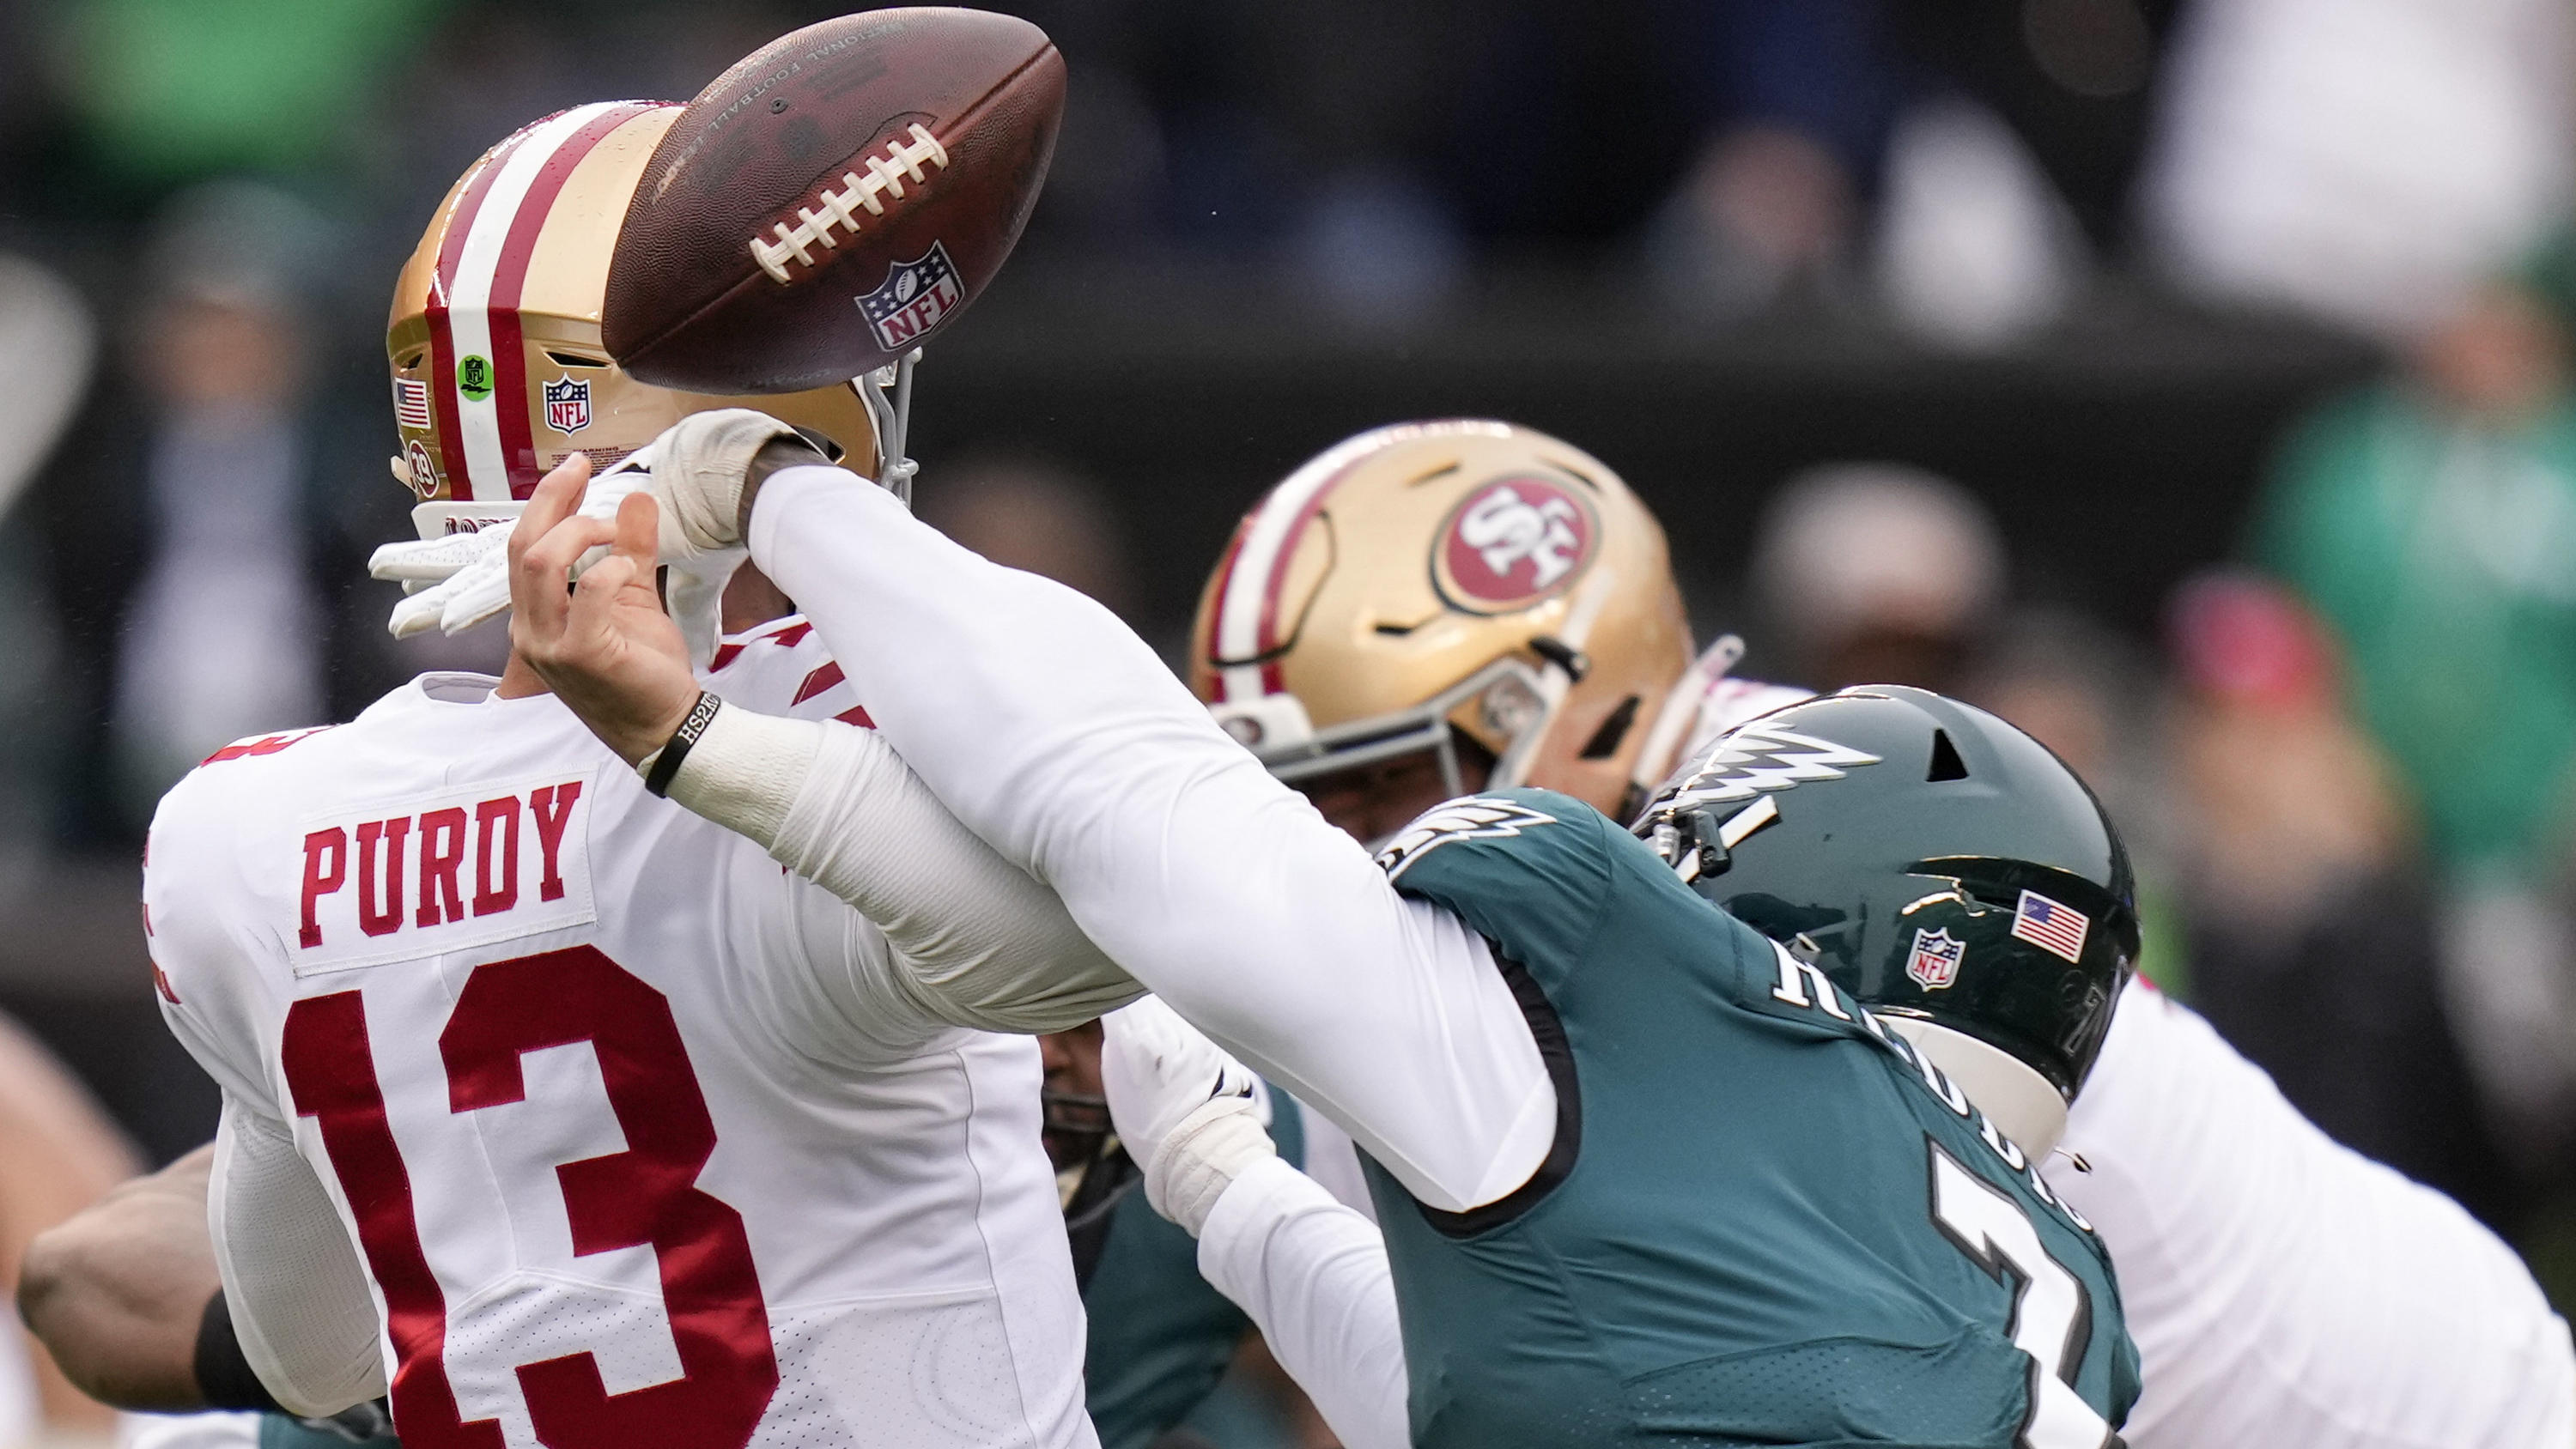 Philadelphia Eagles linebacker Haason Reddick, right, causes a fumble by San Francisco 49ers quarterback Brock Purdy during the first half of the NFC Championship NFL football game between the Philadelphia Eagles and the San Francisco 49ers on Sunday